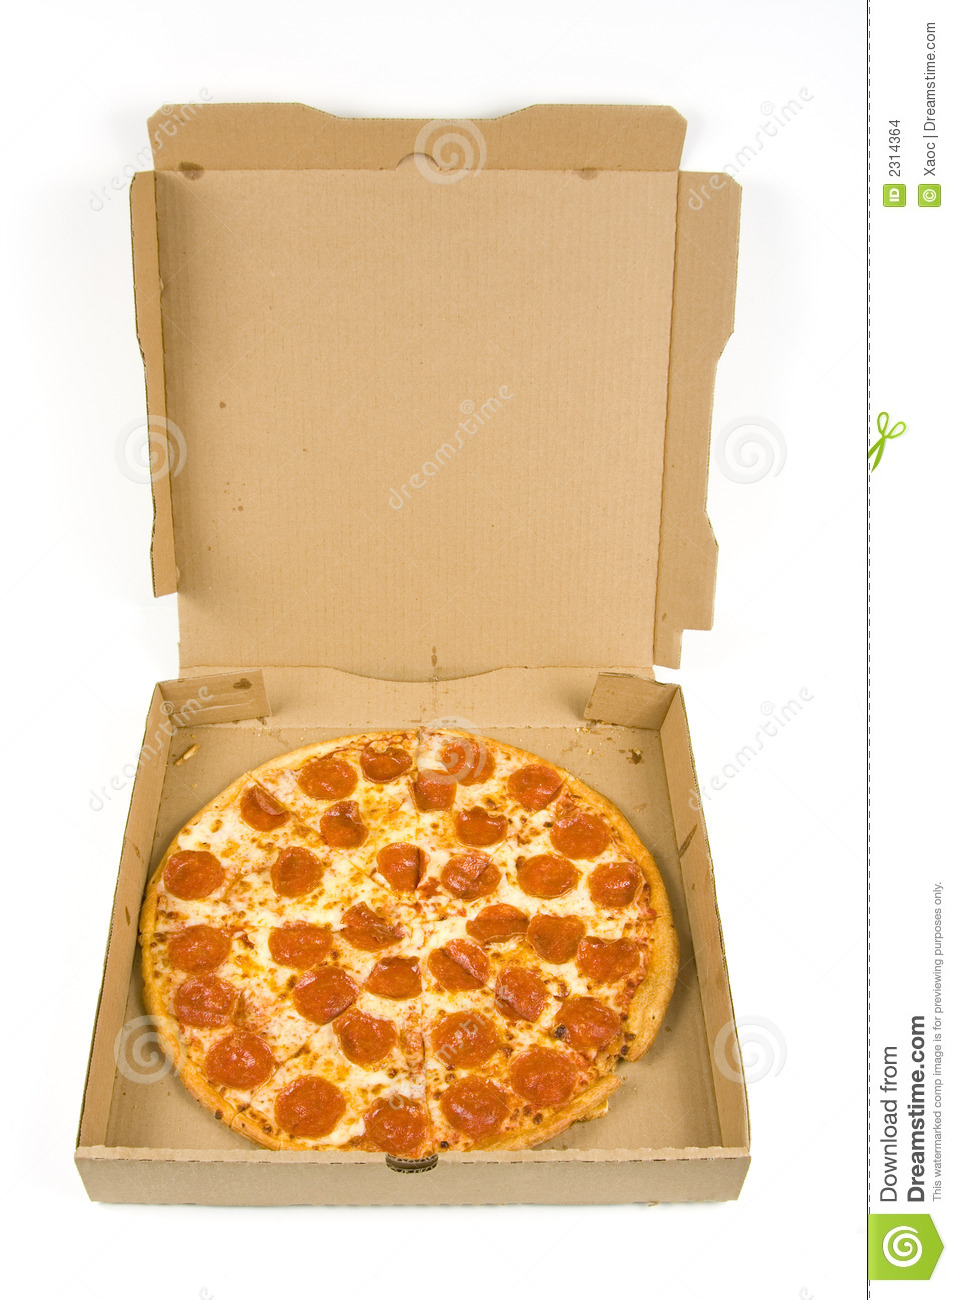 Whole Pepperoni Pizza In A Box Isolated On A White Background 